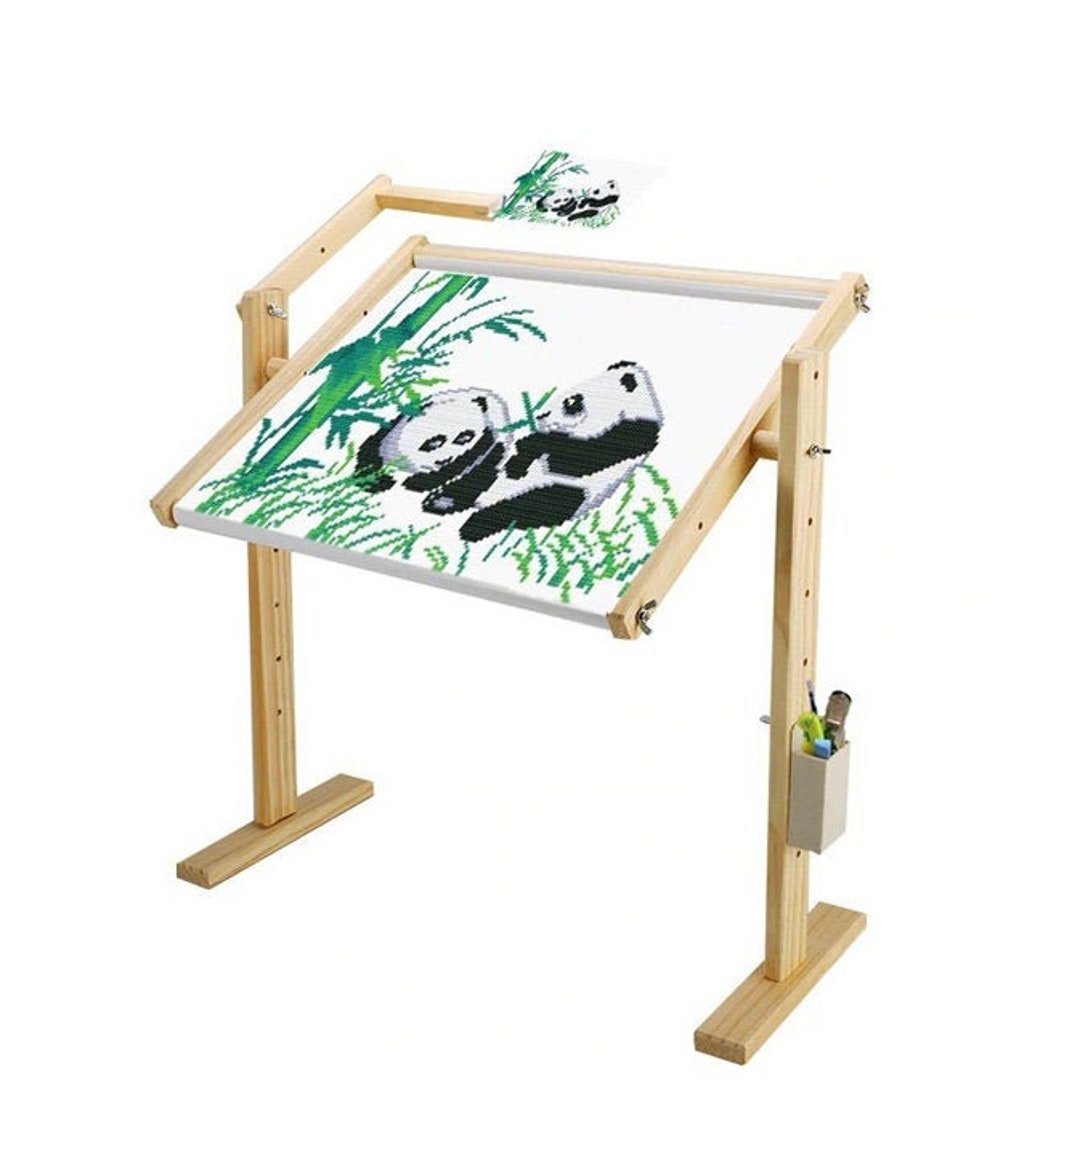 Luca-S Table-Type Wooden Embroidery Stand 16 x 22 - 123Stitch